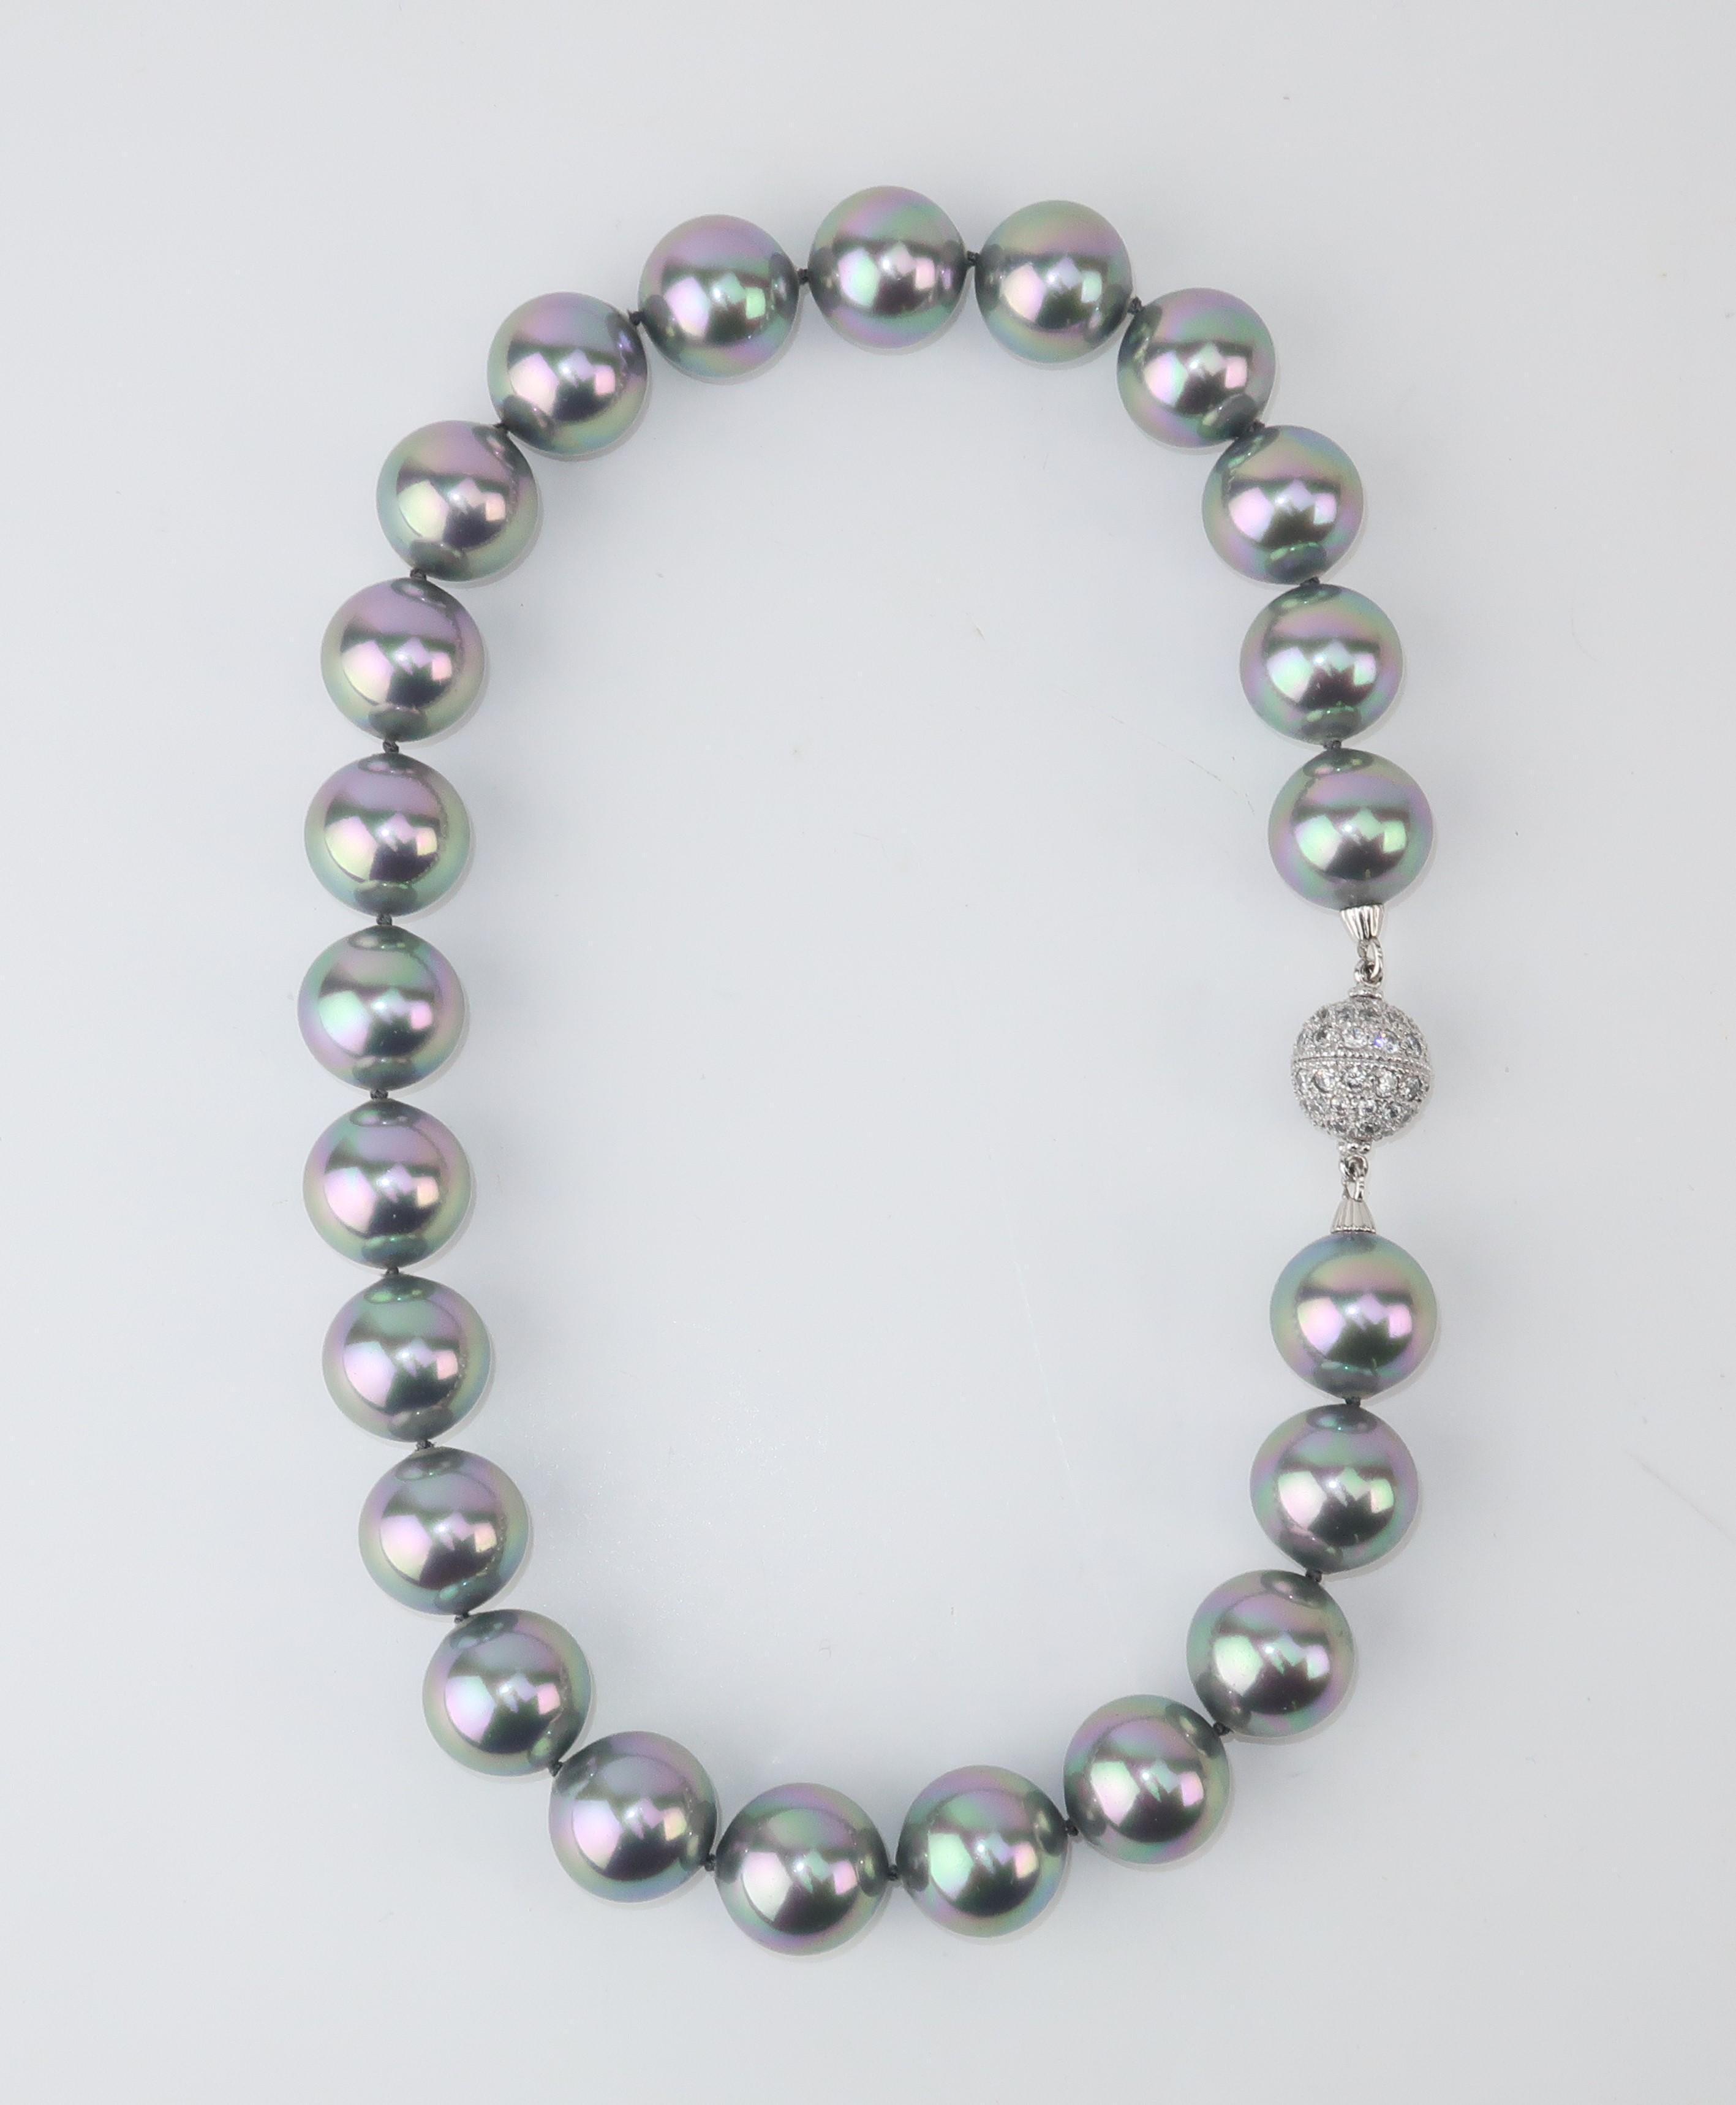 Faux fabulous!  A classy string of large faux gray pearls with a crystal rhinestone encrusted closure.  The pearls have a beautiful luster with just a hint of pink perfect for adding a soft glow.  The inside of the closure appears to be marked '925'